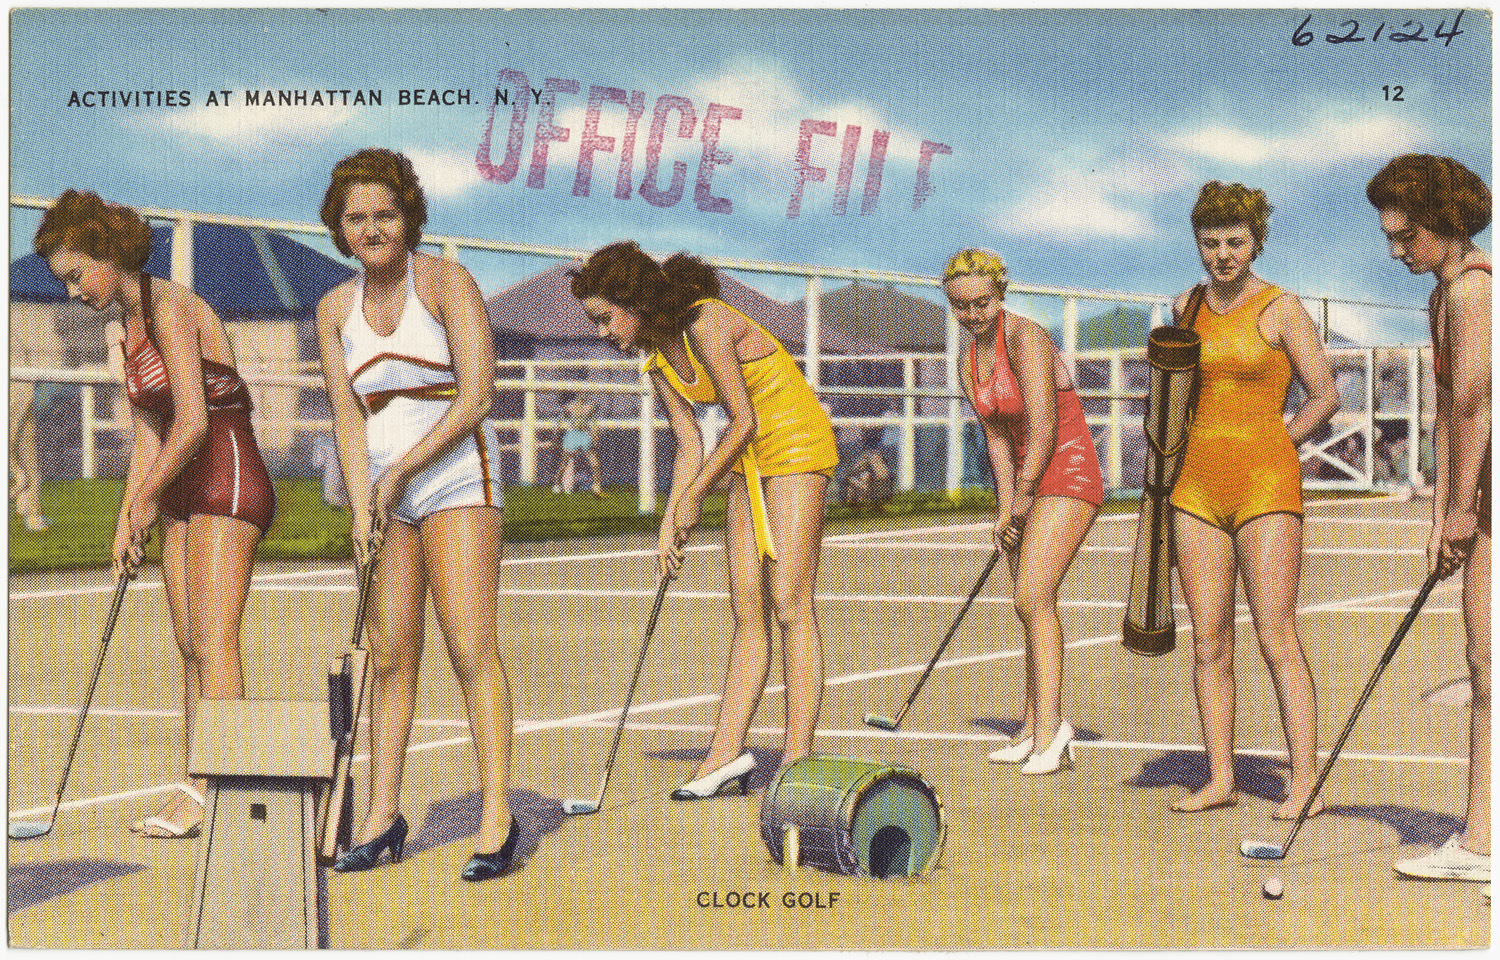 a vintage advertit showing women on the tennis court